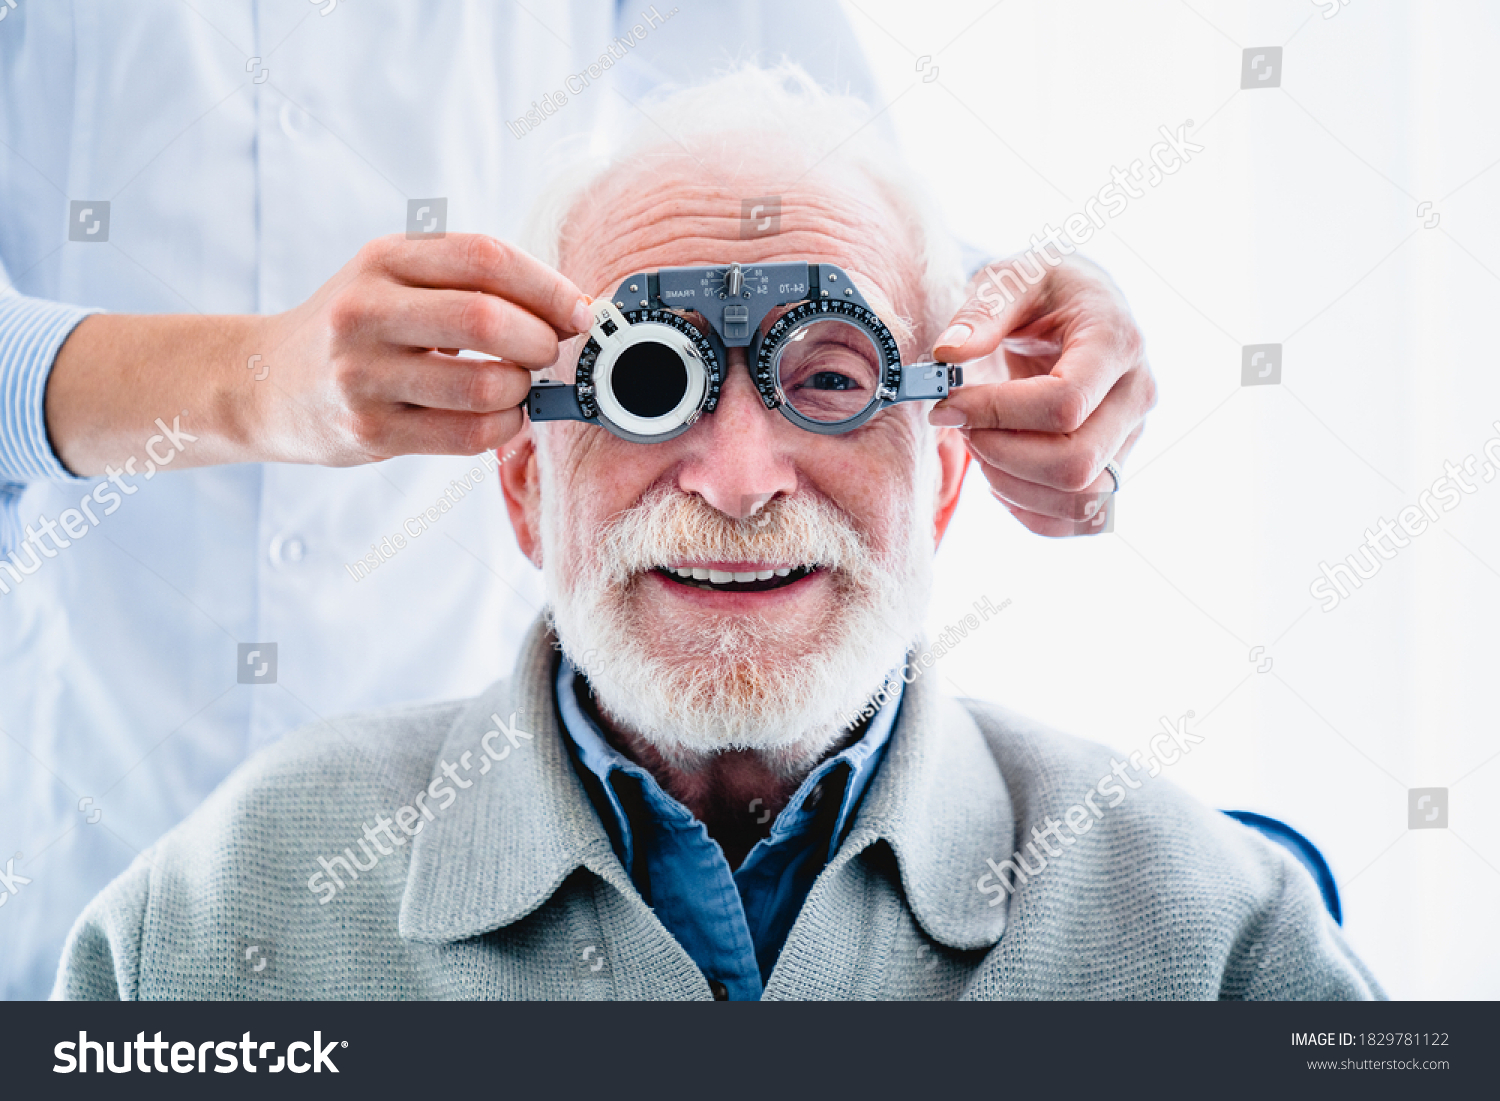 Oculist putting ophthalmic glasses on smiling elderly male patient #1829781122